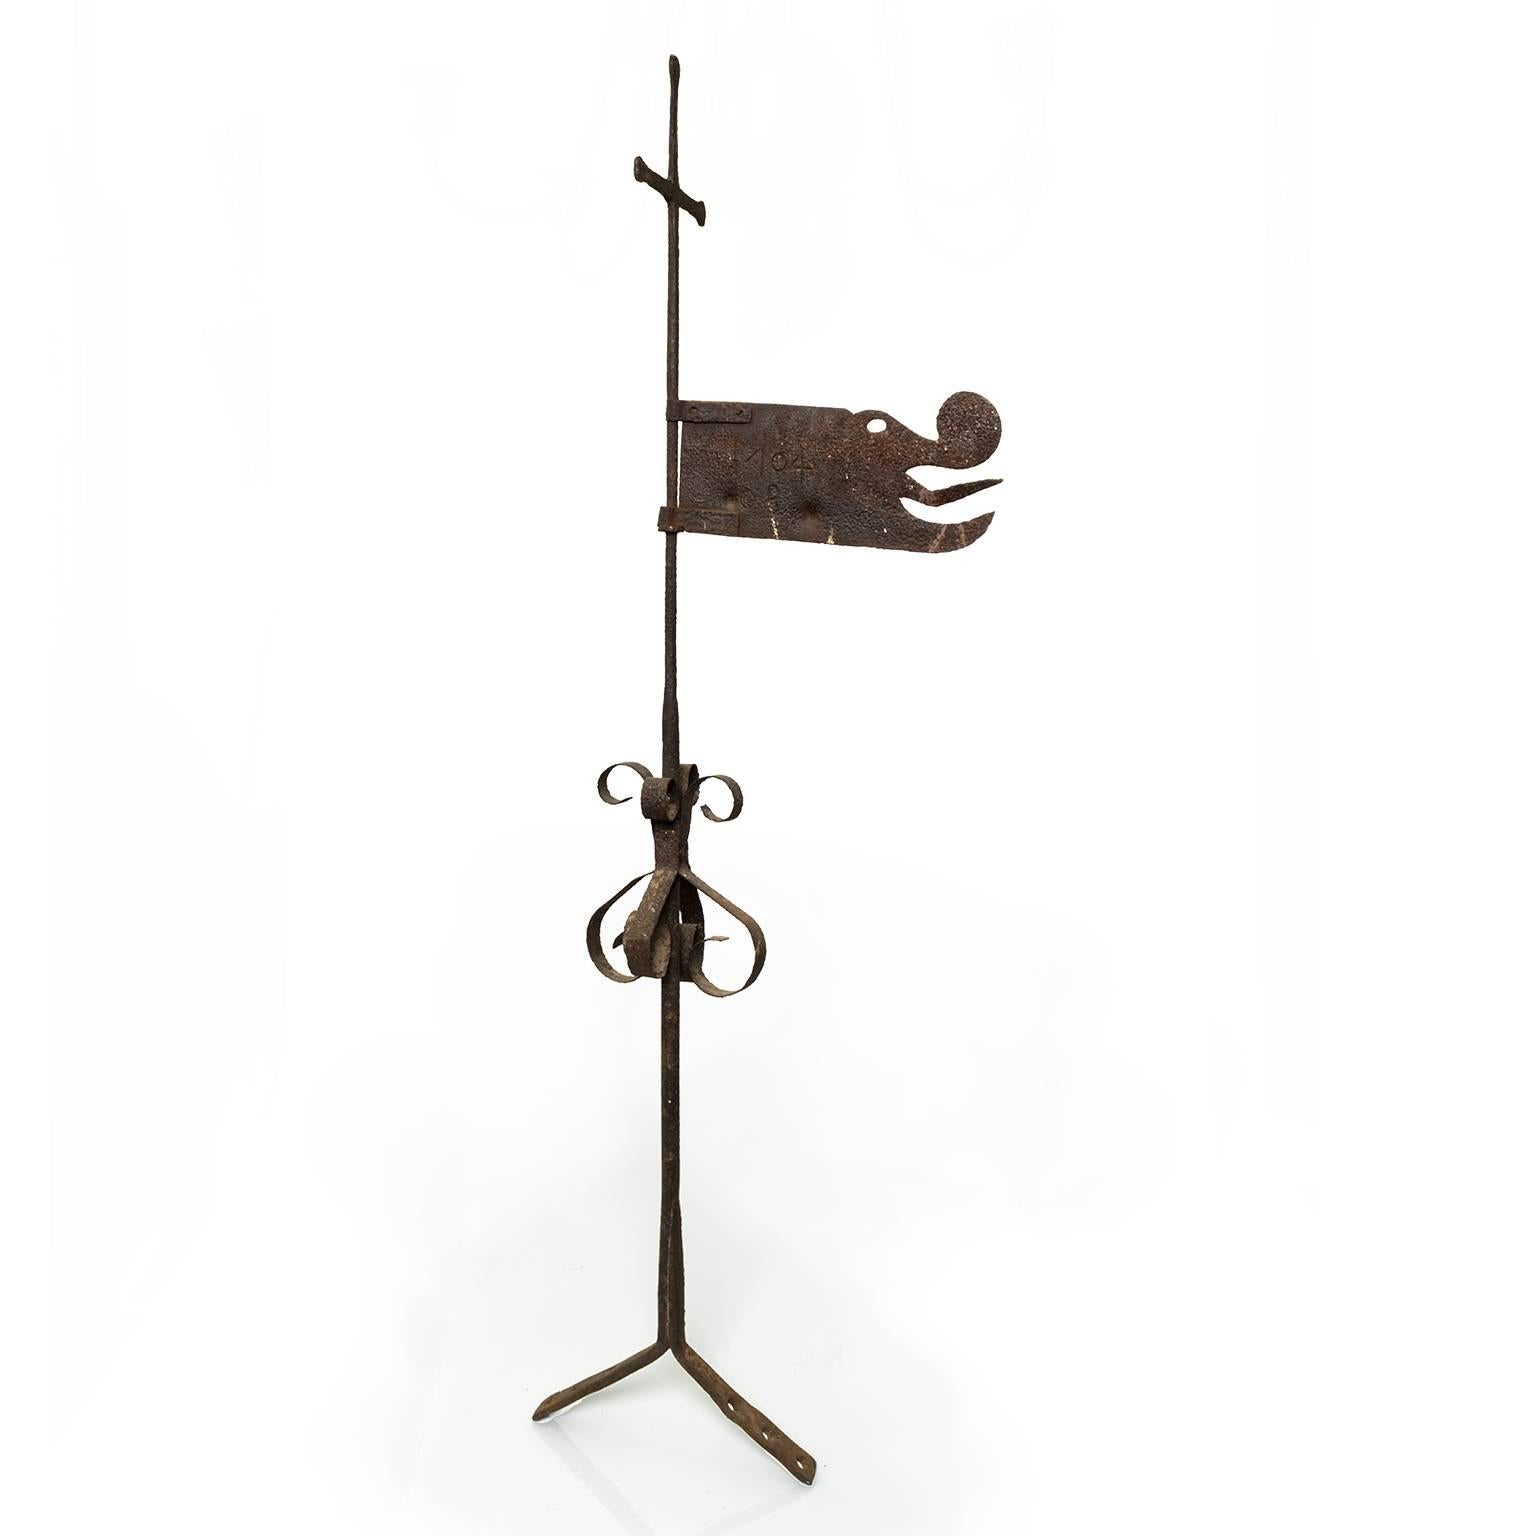 Swedish metal (iron) weather-vane of a dragon's head on sword shaped stem. The date "1704" is impressed on the dragon's head which most likely refers the age of the house on which this weaver-vane once stood. This piece is probably early